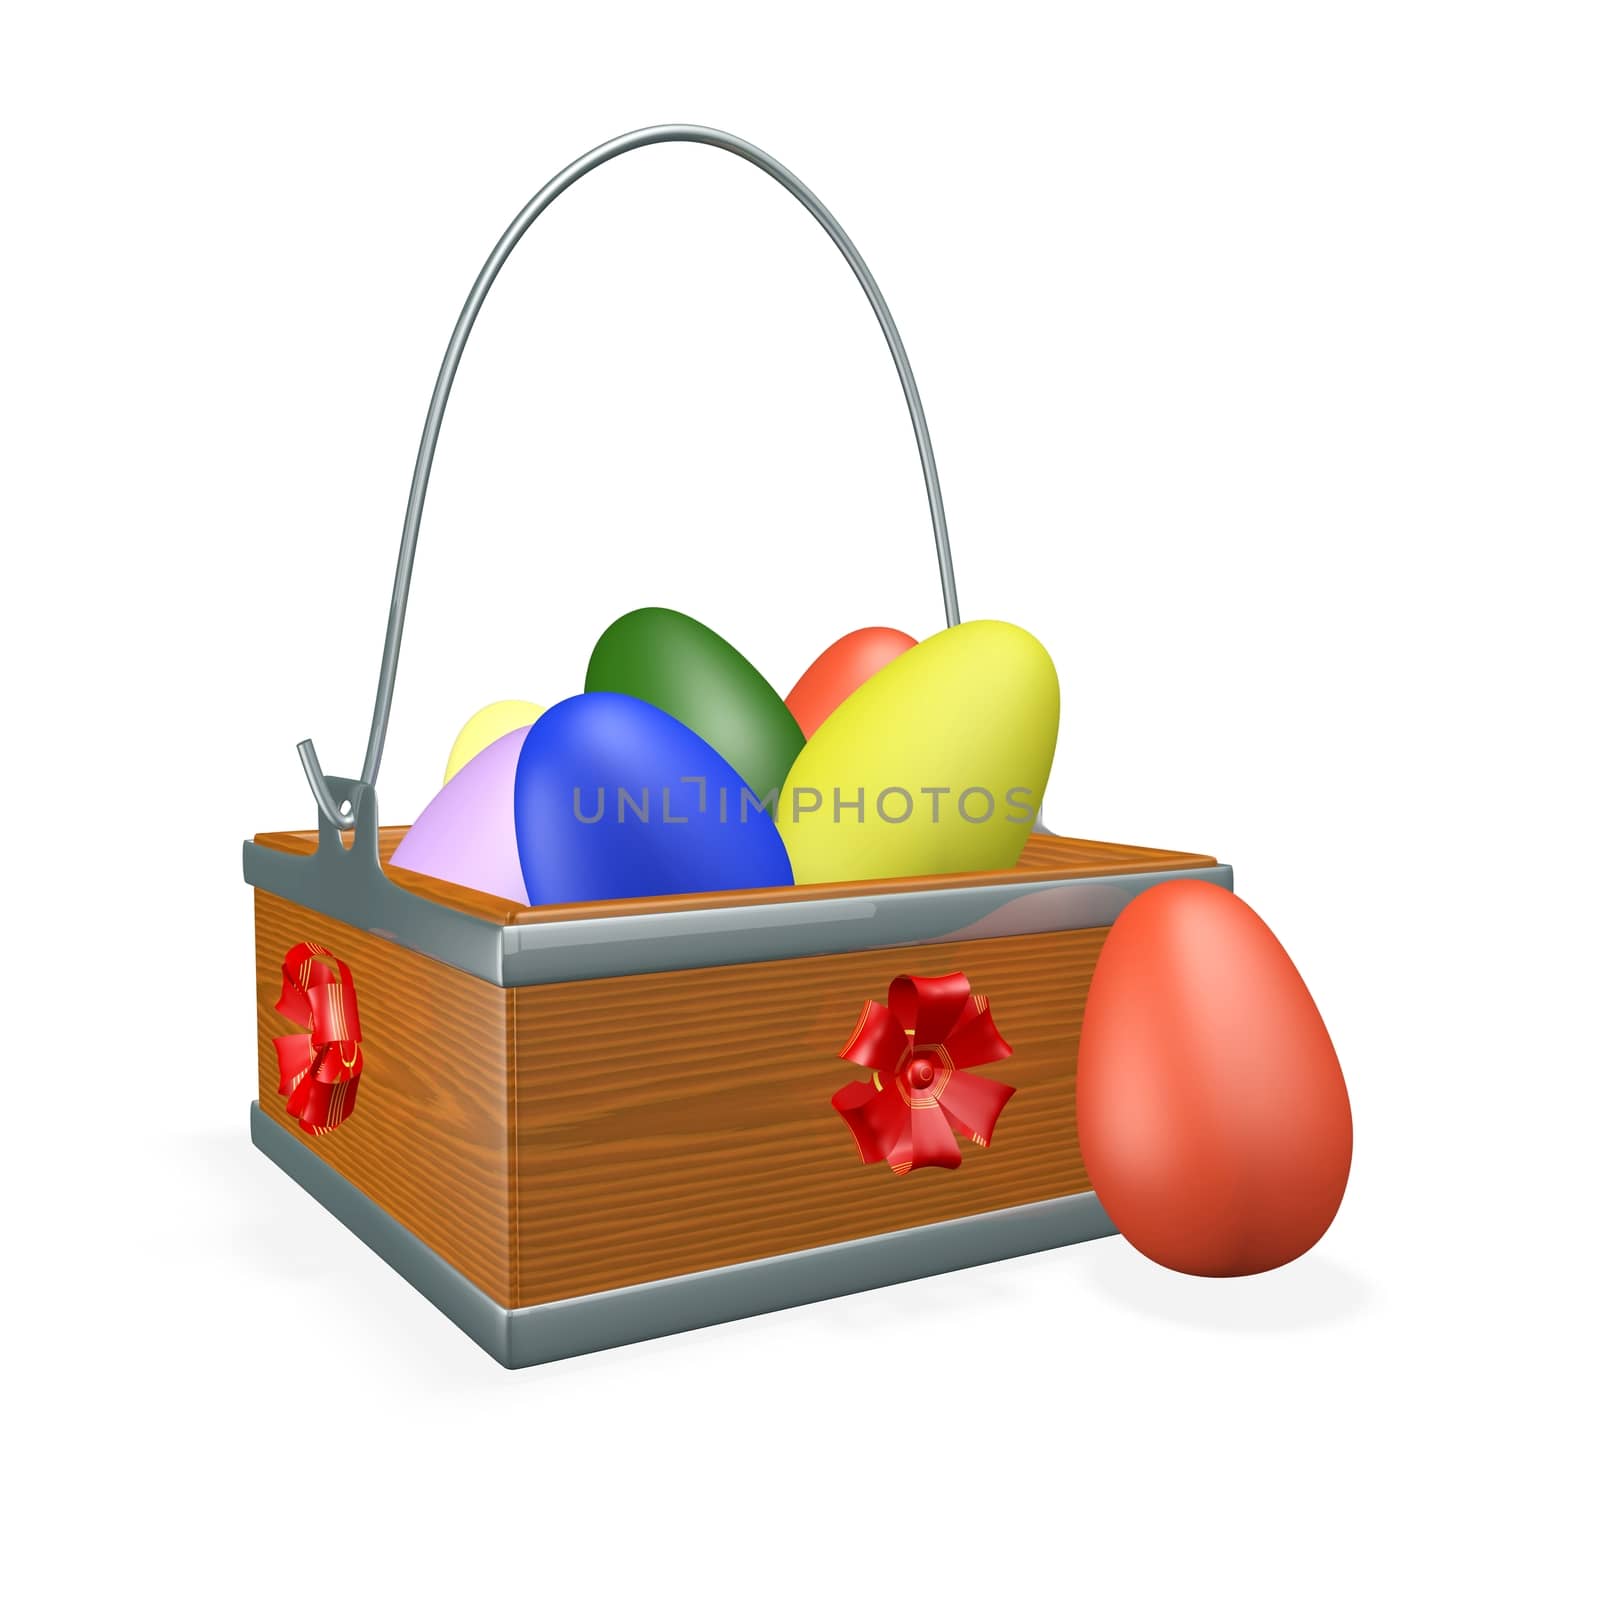 A 3D square wooden basket with steel handle, decorated with ribbon bows, filled with colorful painted Easter eggs. 
